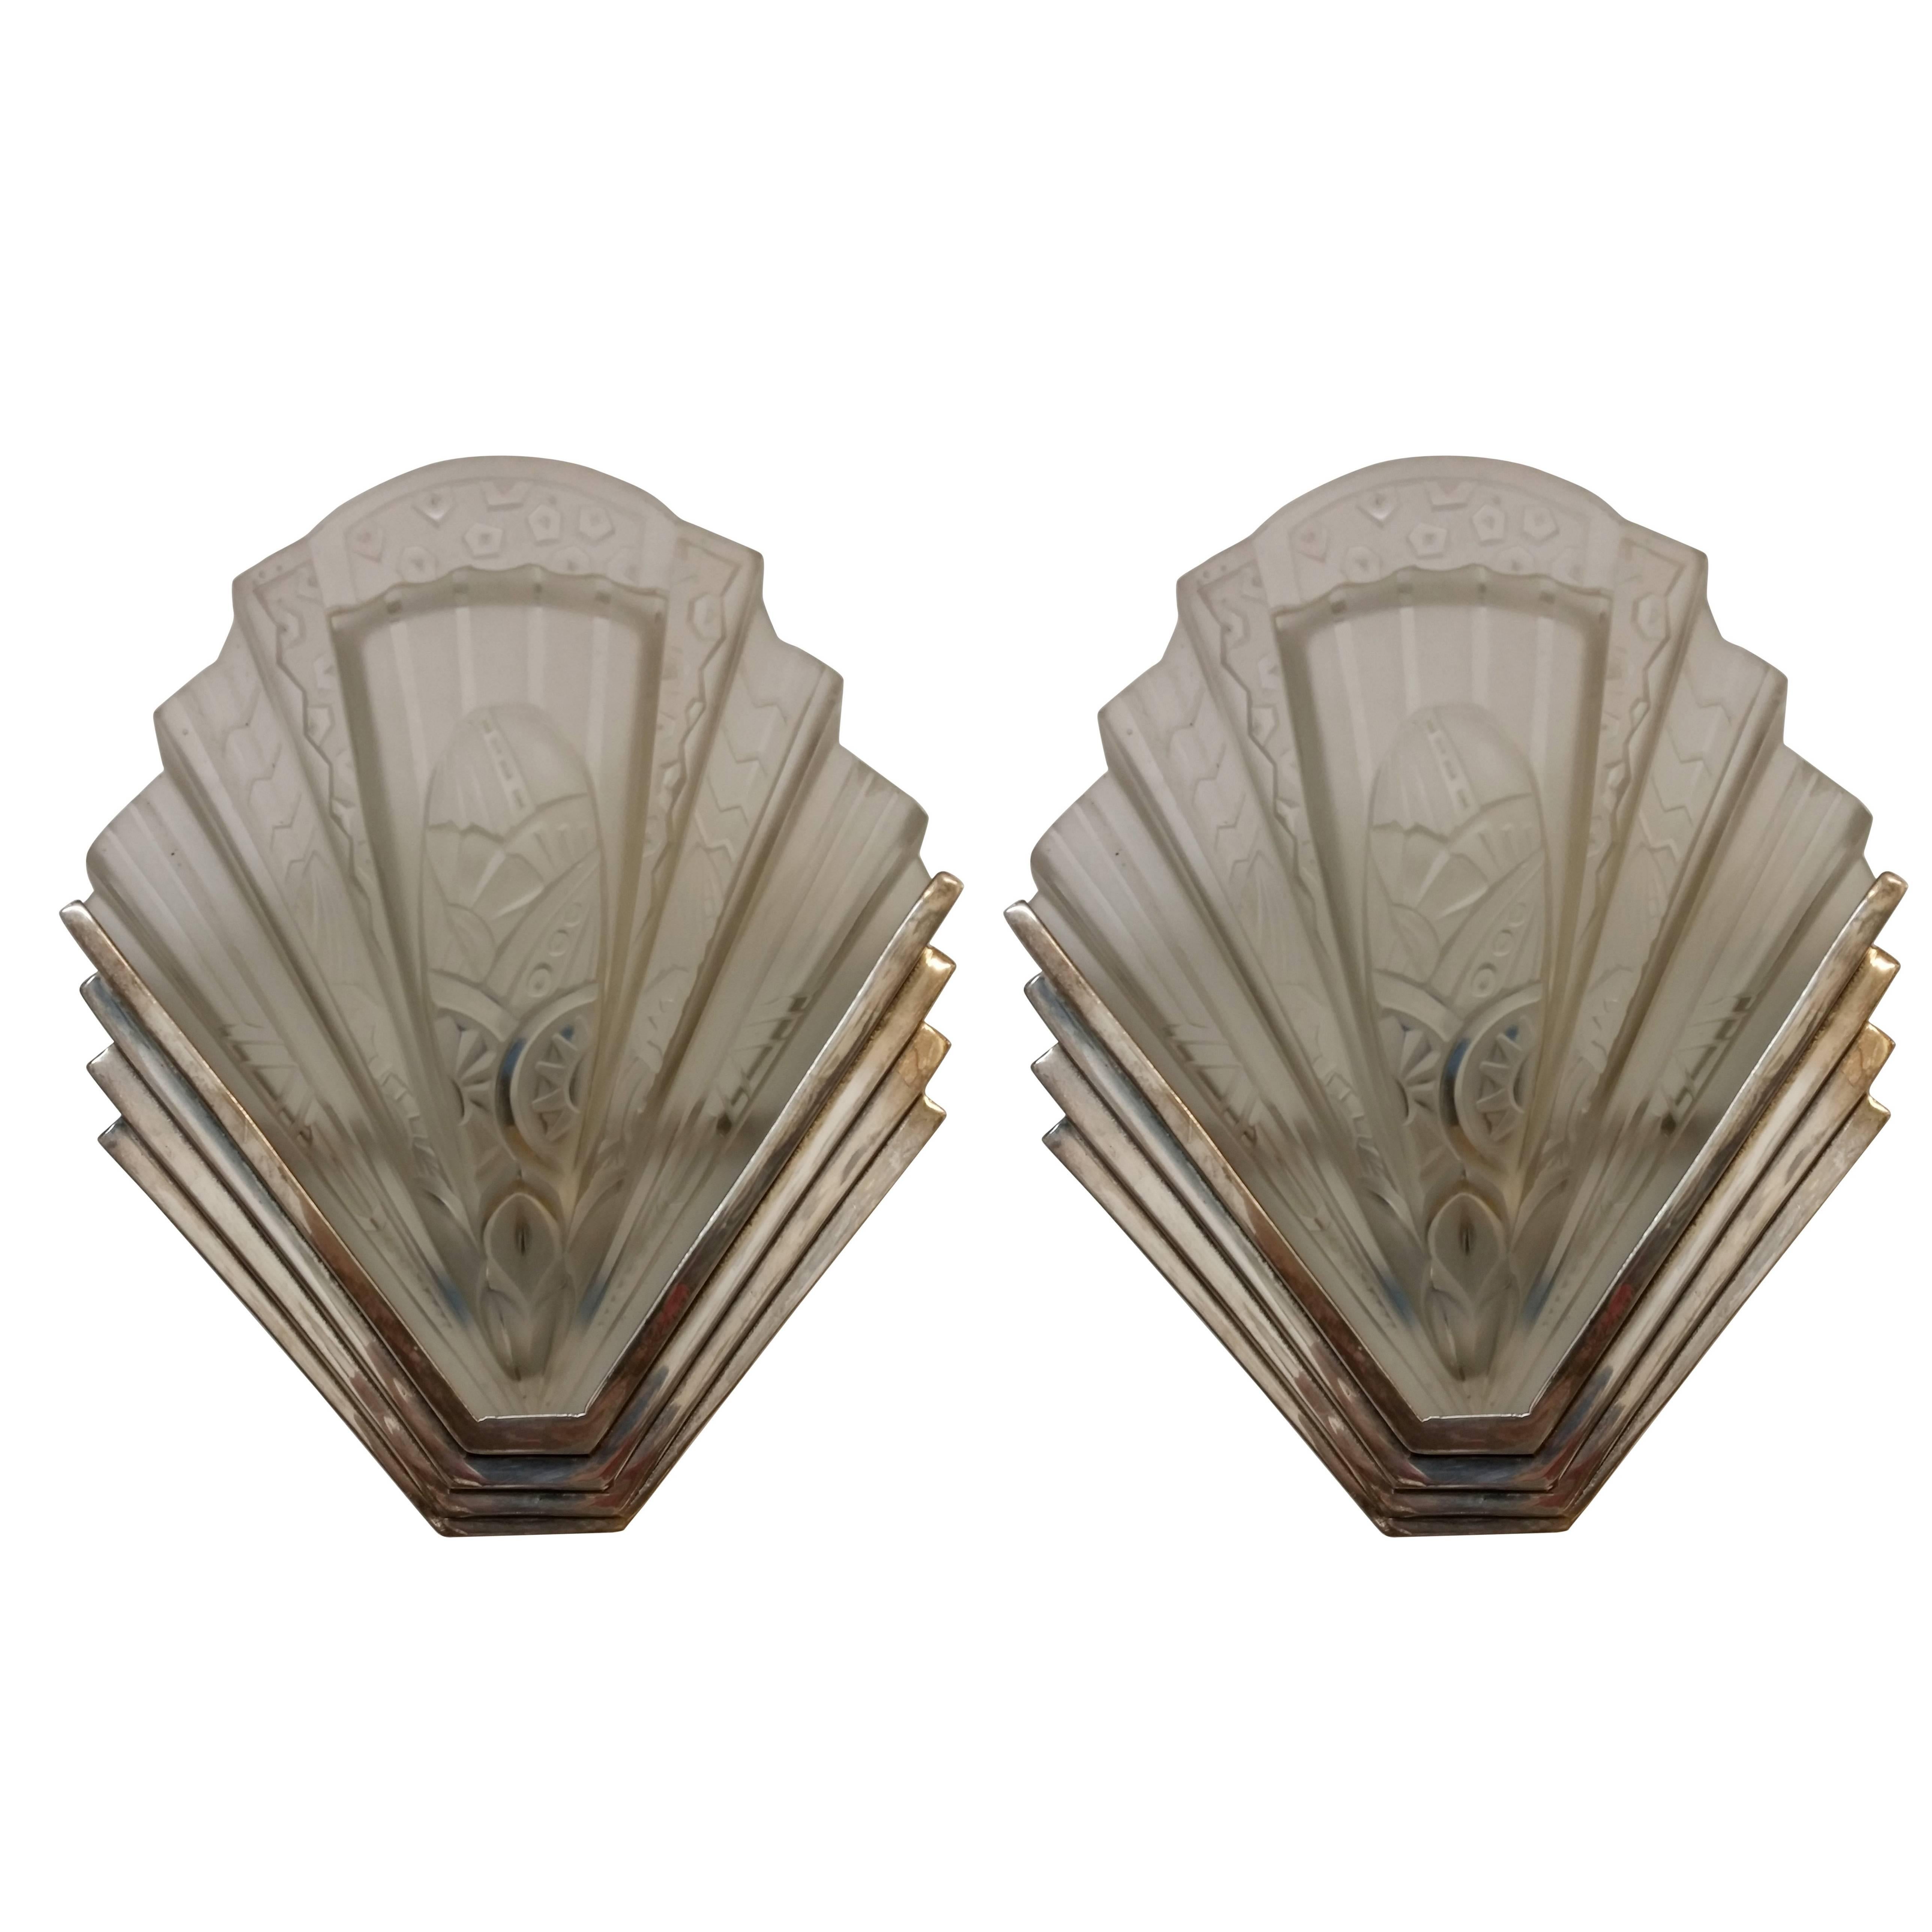 A pair of French Art Deco wall sconces signed 